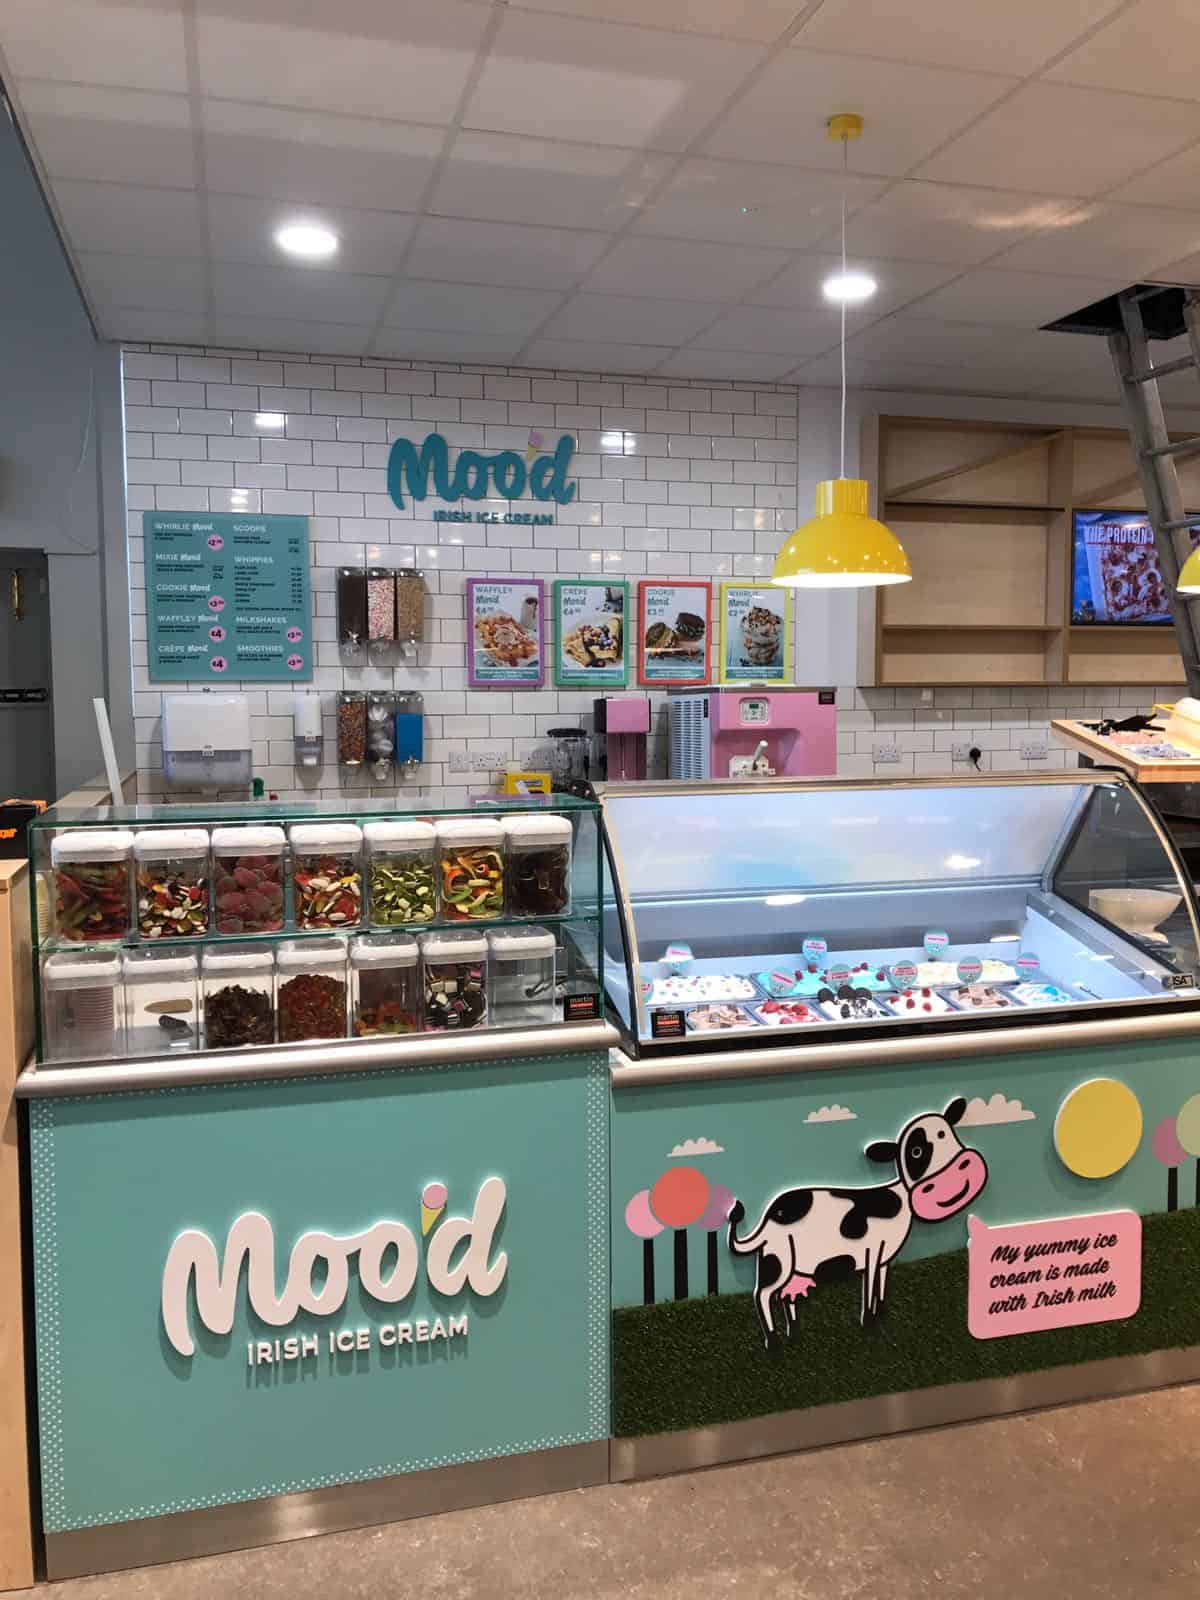 MARTIN FOOD EQUIPMENT SETS THE MOO'D IN CENTRA & SUPERVALU 